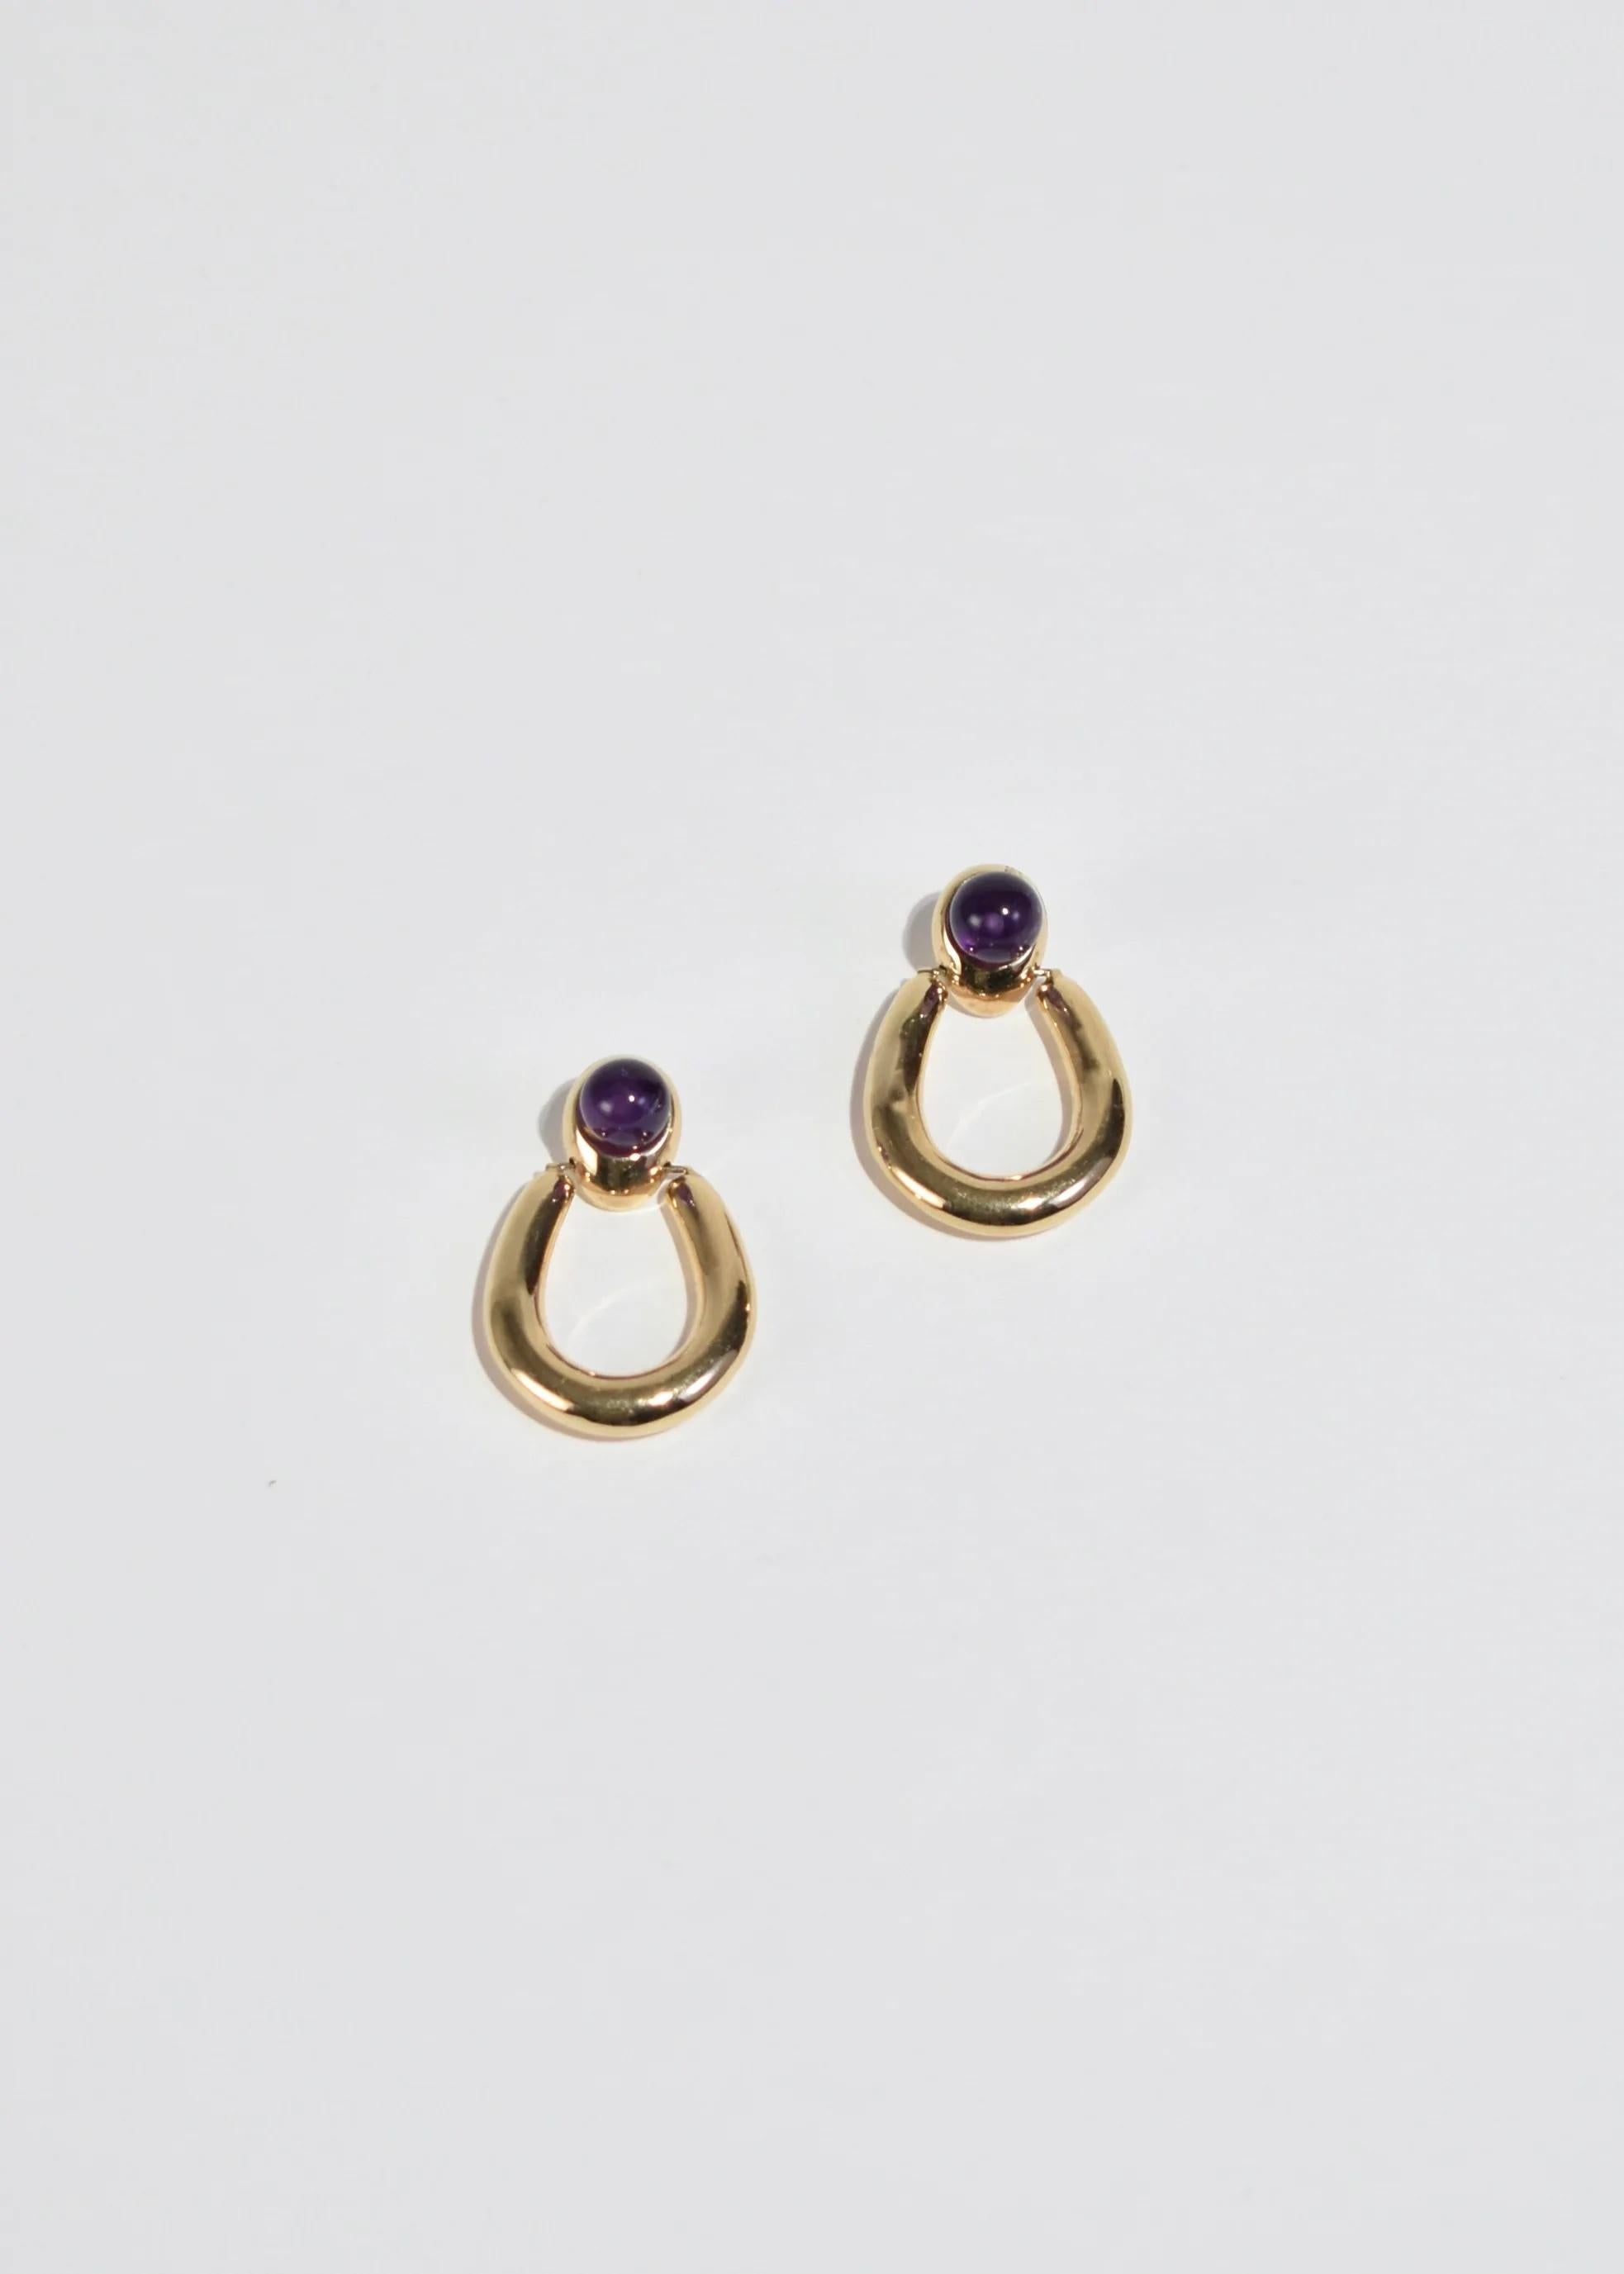 Beautiful vintage earrings with oval drop detail and round amethyst cabochons, pierced. Stamped 14k.

Material: 14k gold, amethyst.